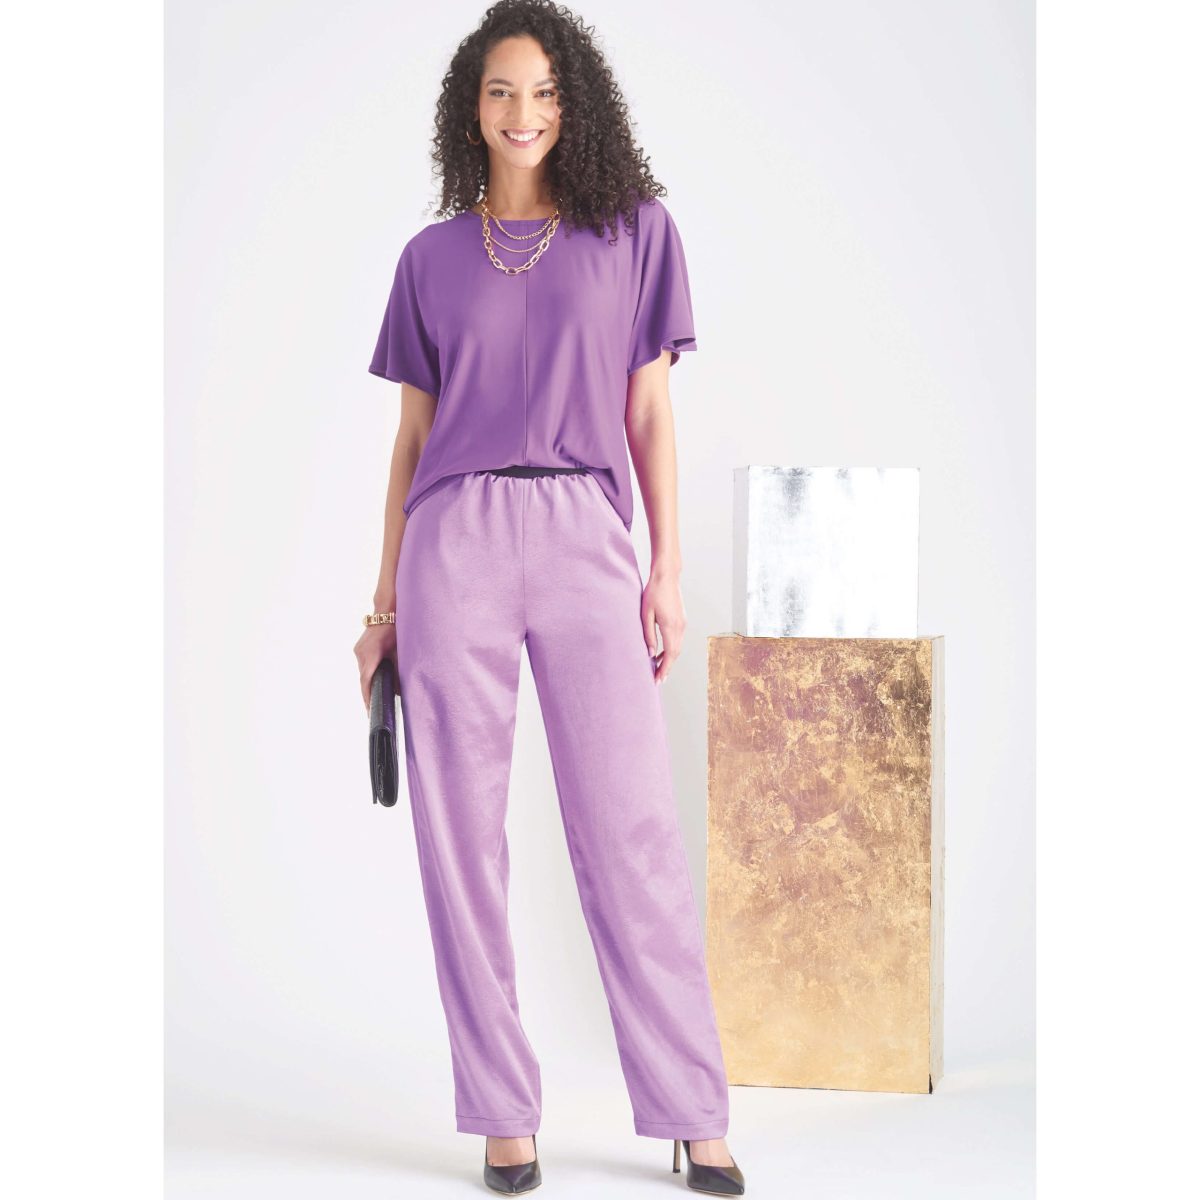 Simplicity Sewing Pattern S9690 Misses' Tops and Pull-On Trousers